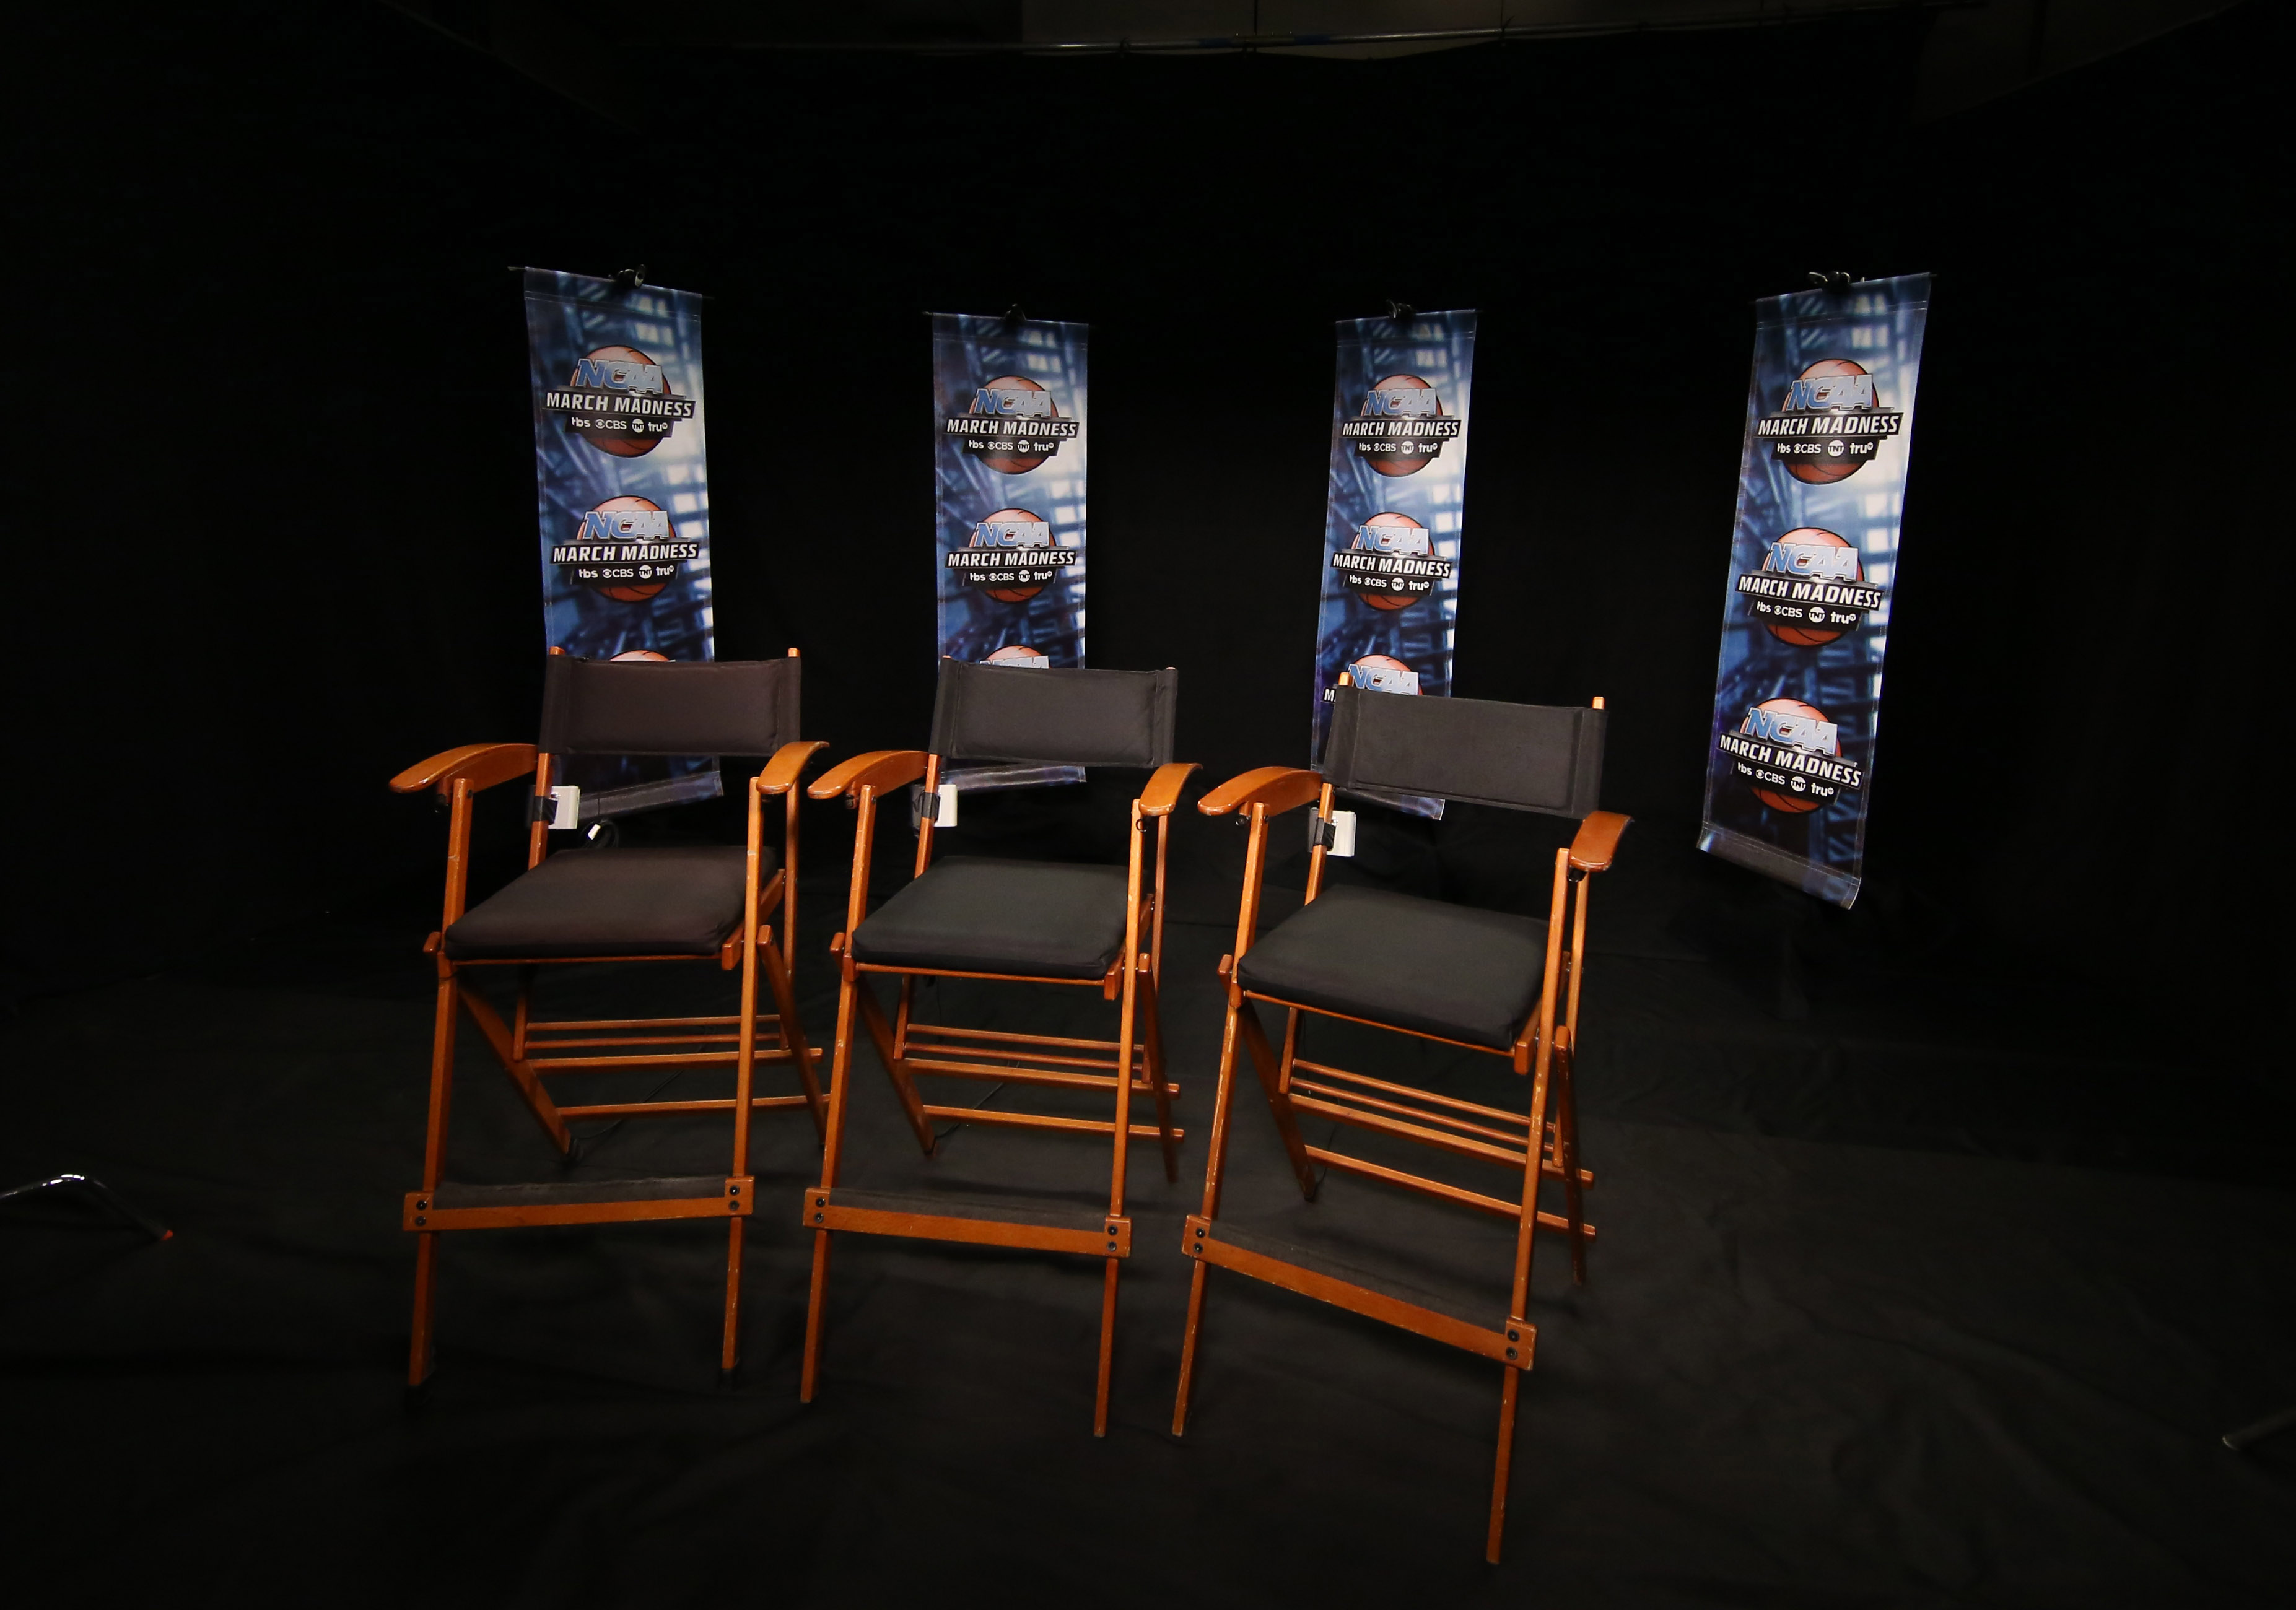 The pictured chairs are as empty as the minds of the morons at CBS when discussing UCLA.